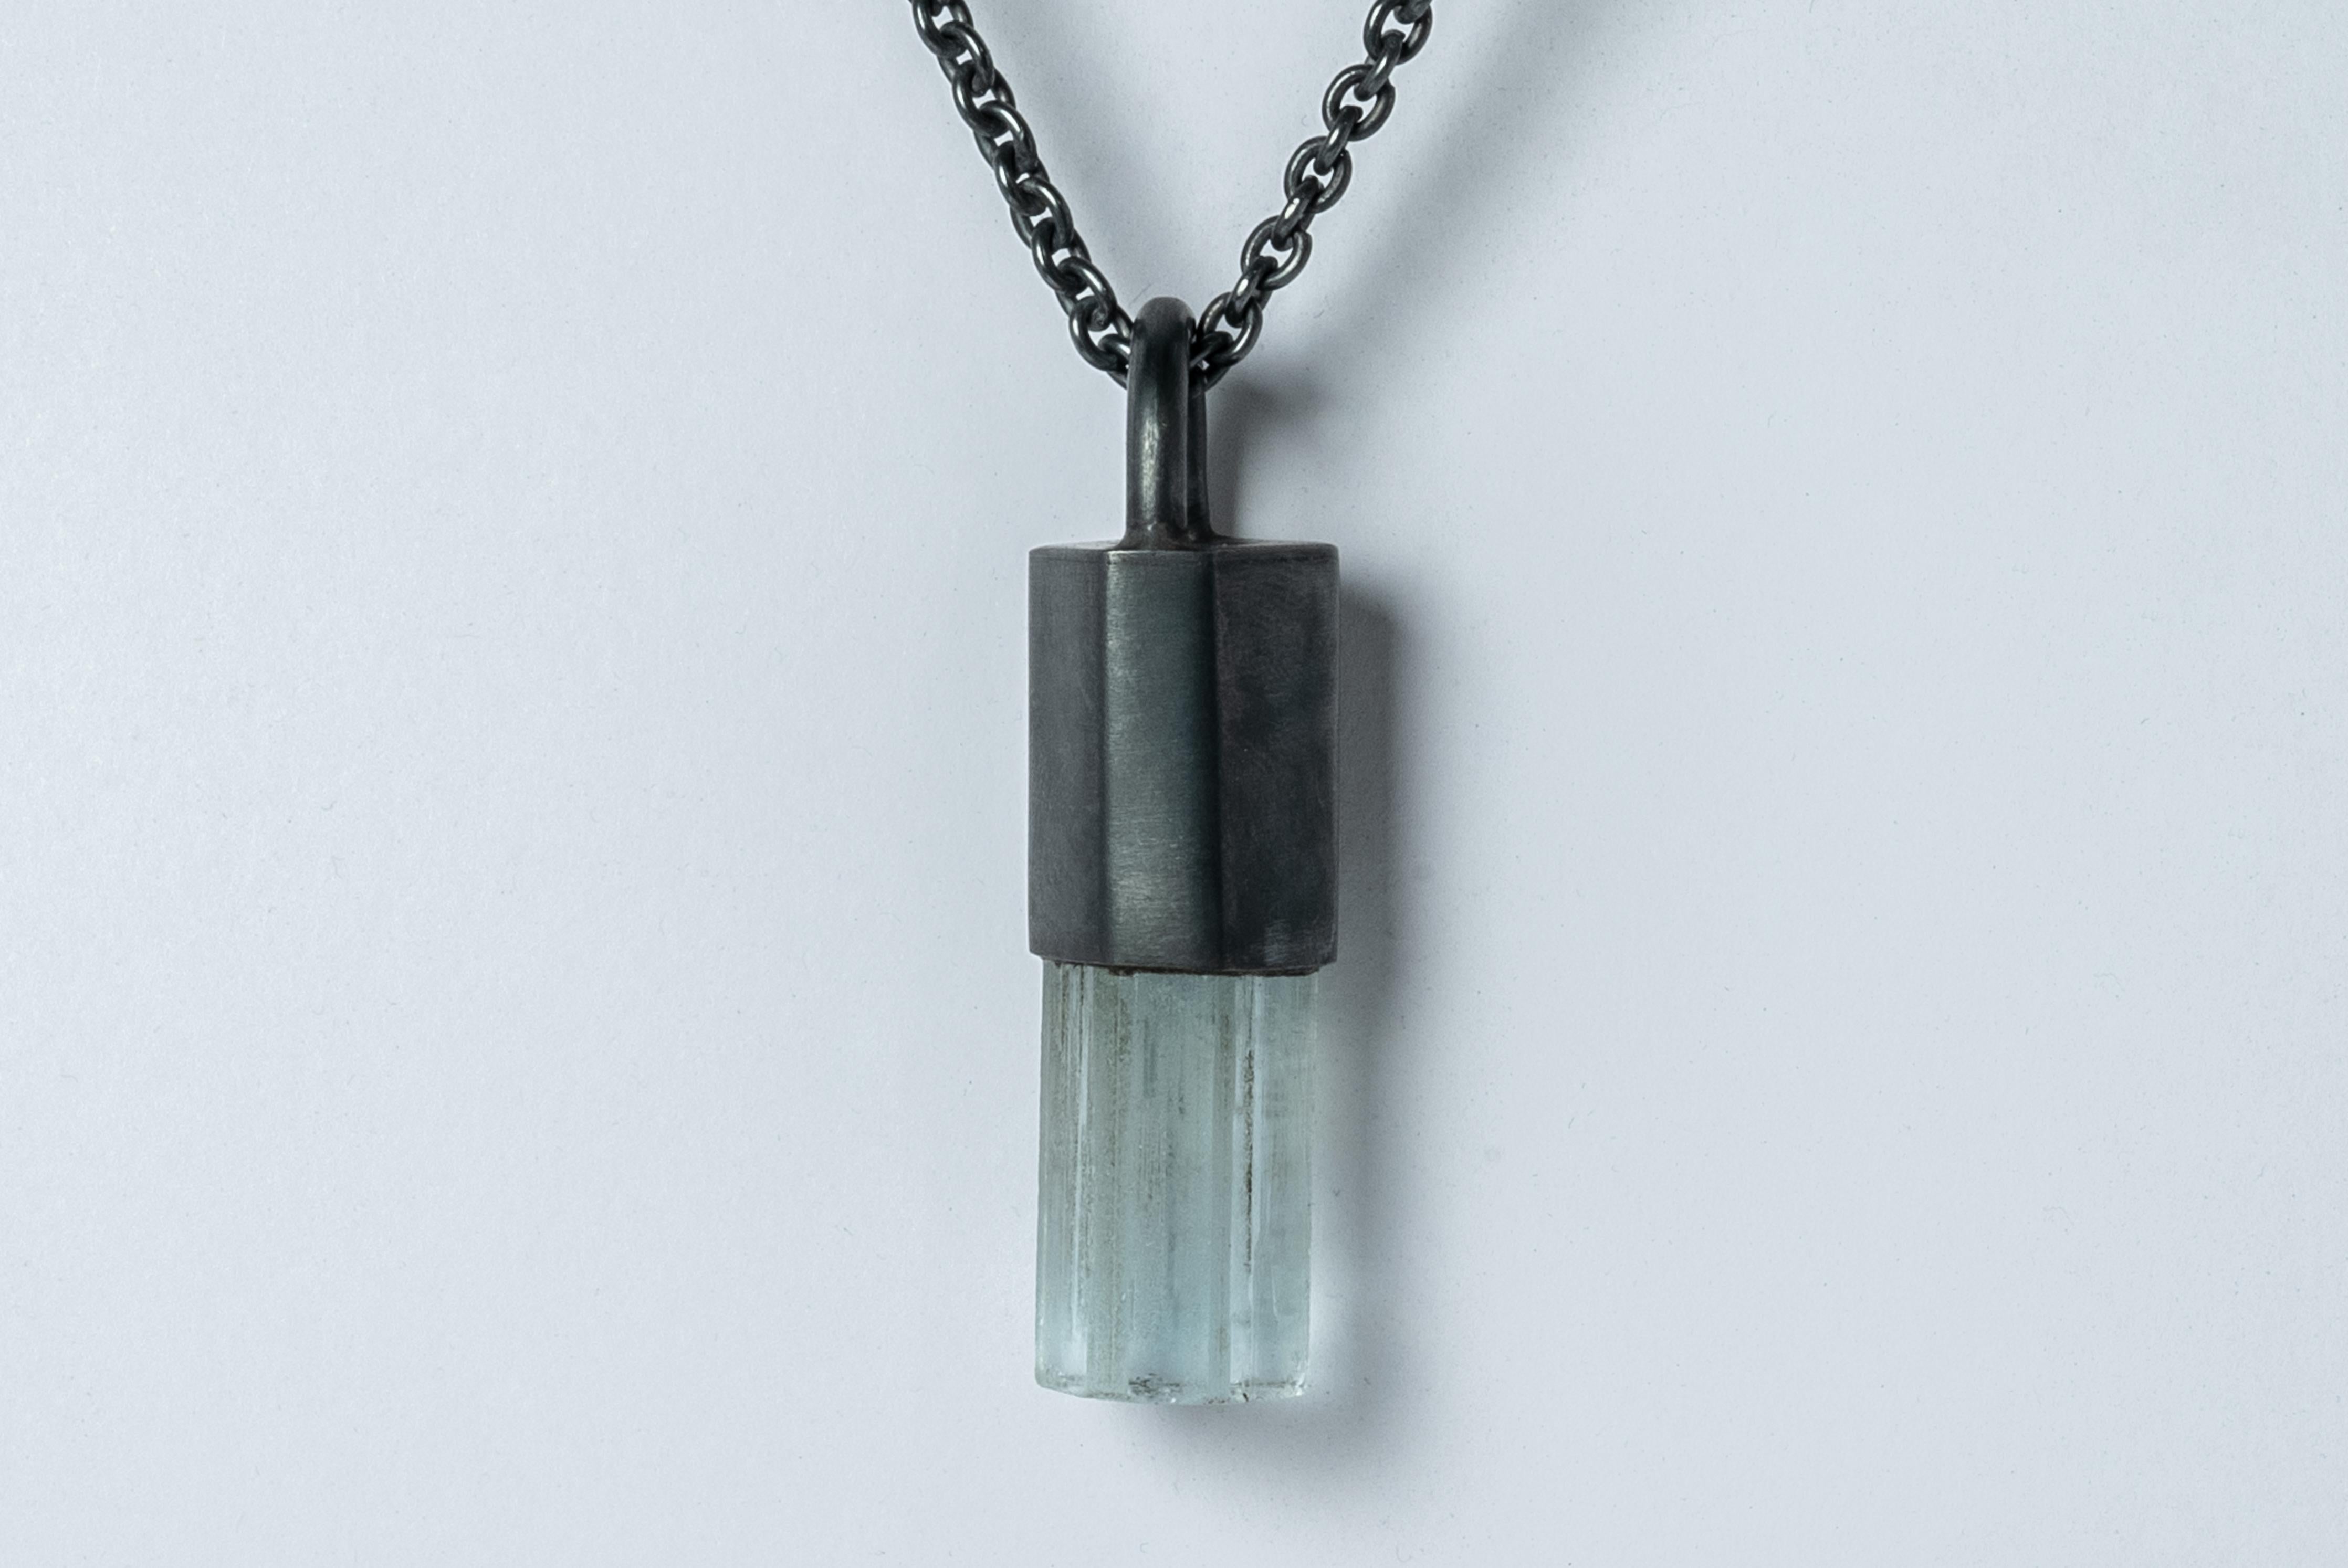 Talisman necklace in surface oxidized sterling silver and a rough of aquamarine. The Talisman series is an exploration into the power of natural crystals. Tools for Magic. The crystals used in these pieces are discovered through adventure and are